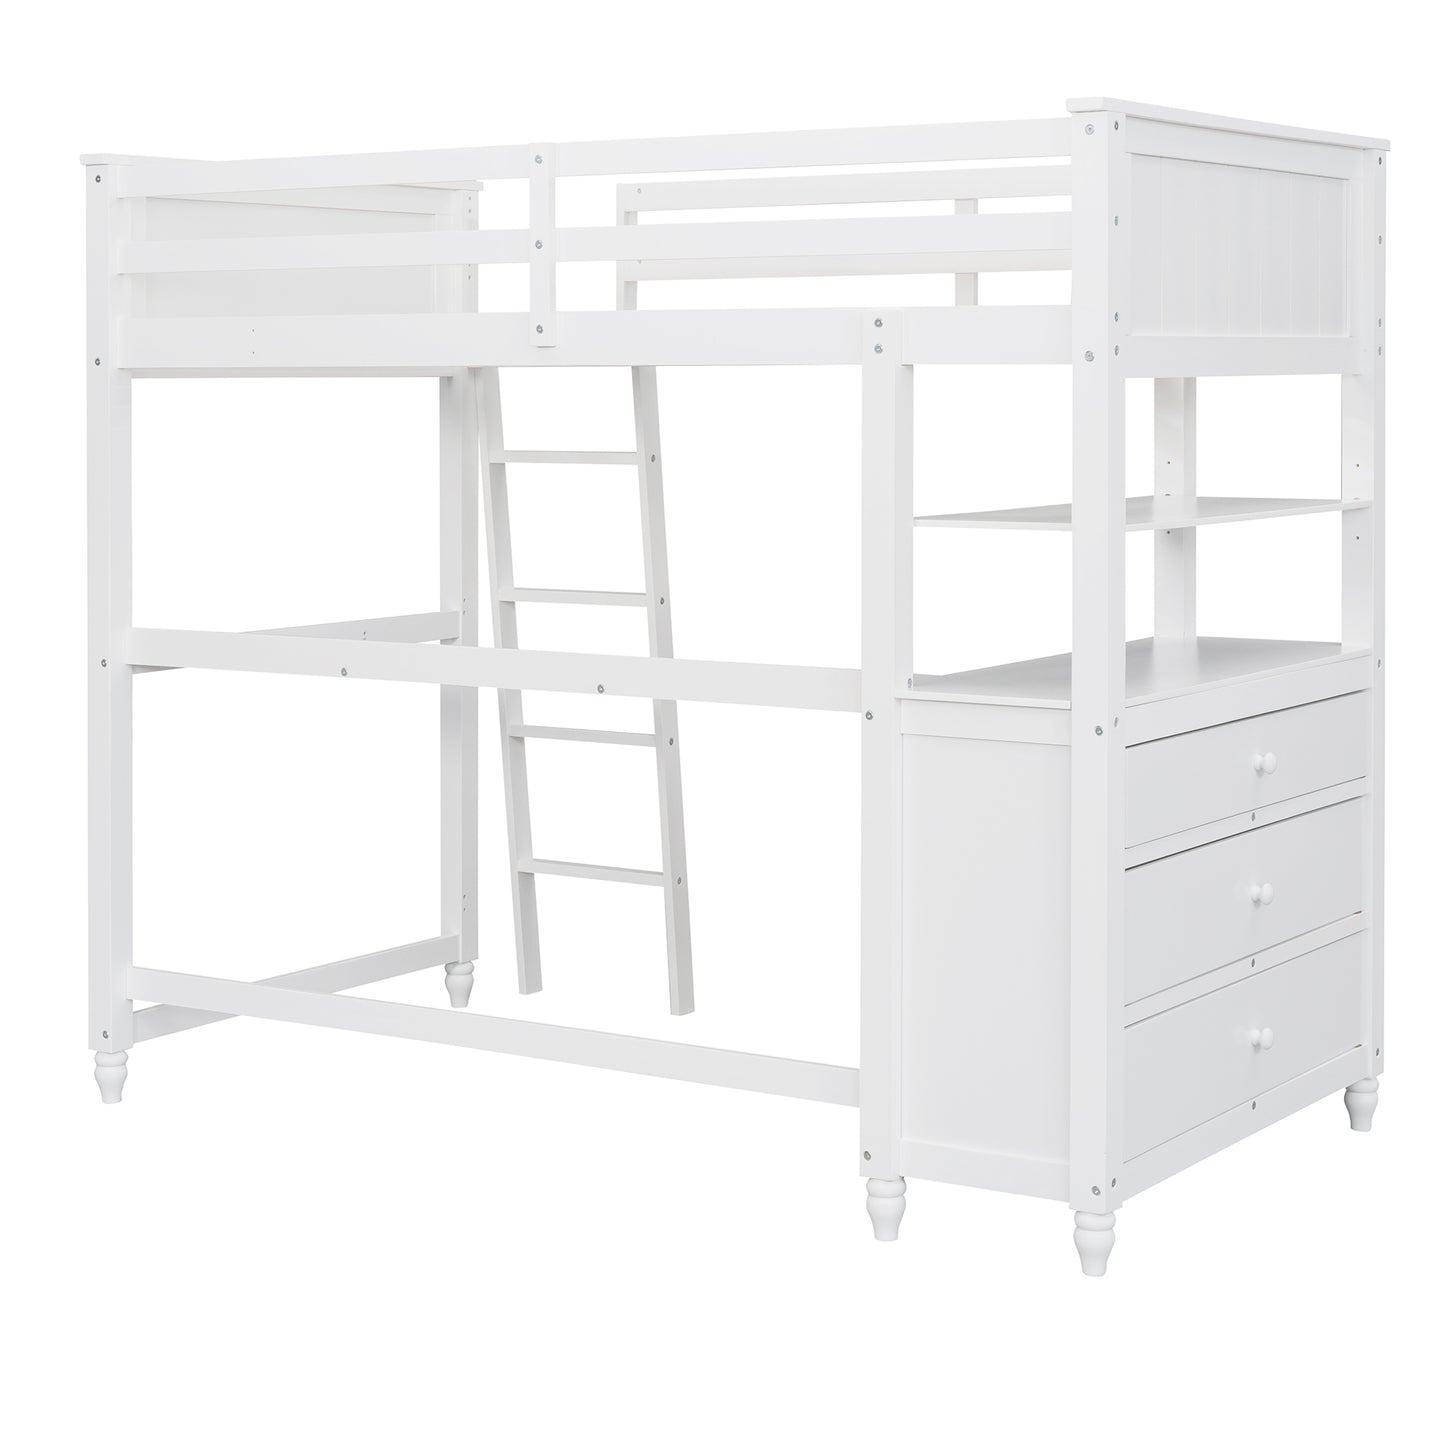 Twin size Loft Bed with Drawers and Desk, Wooden Loft Bed with Shelves - White